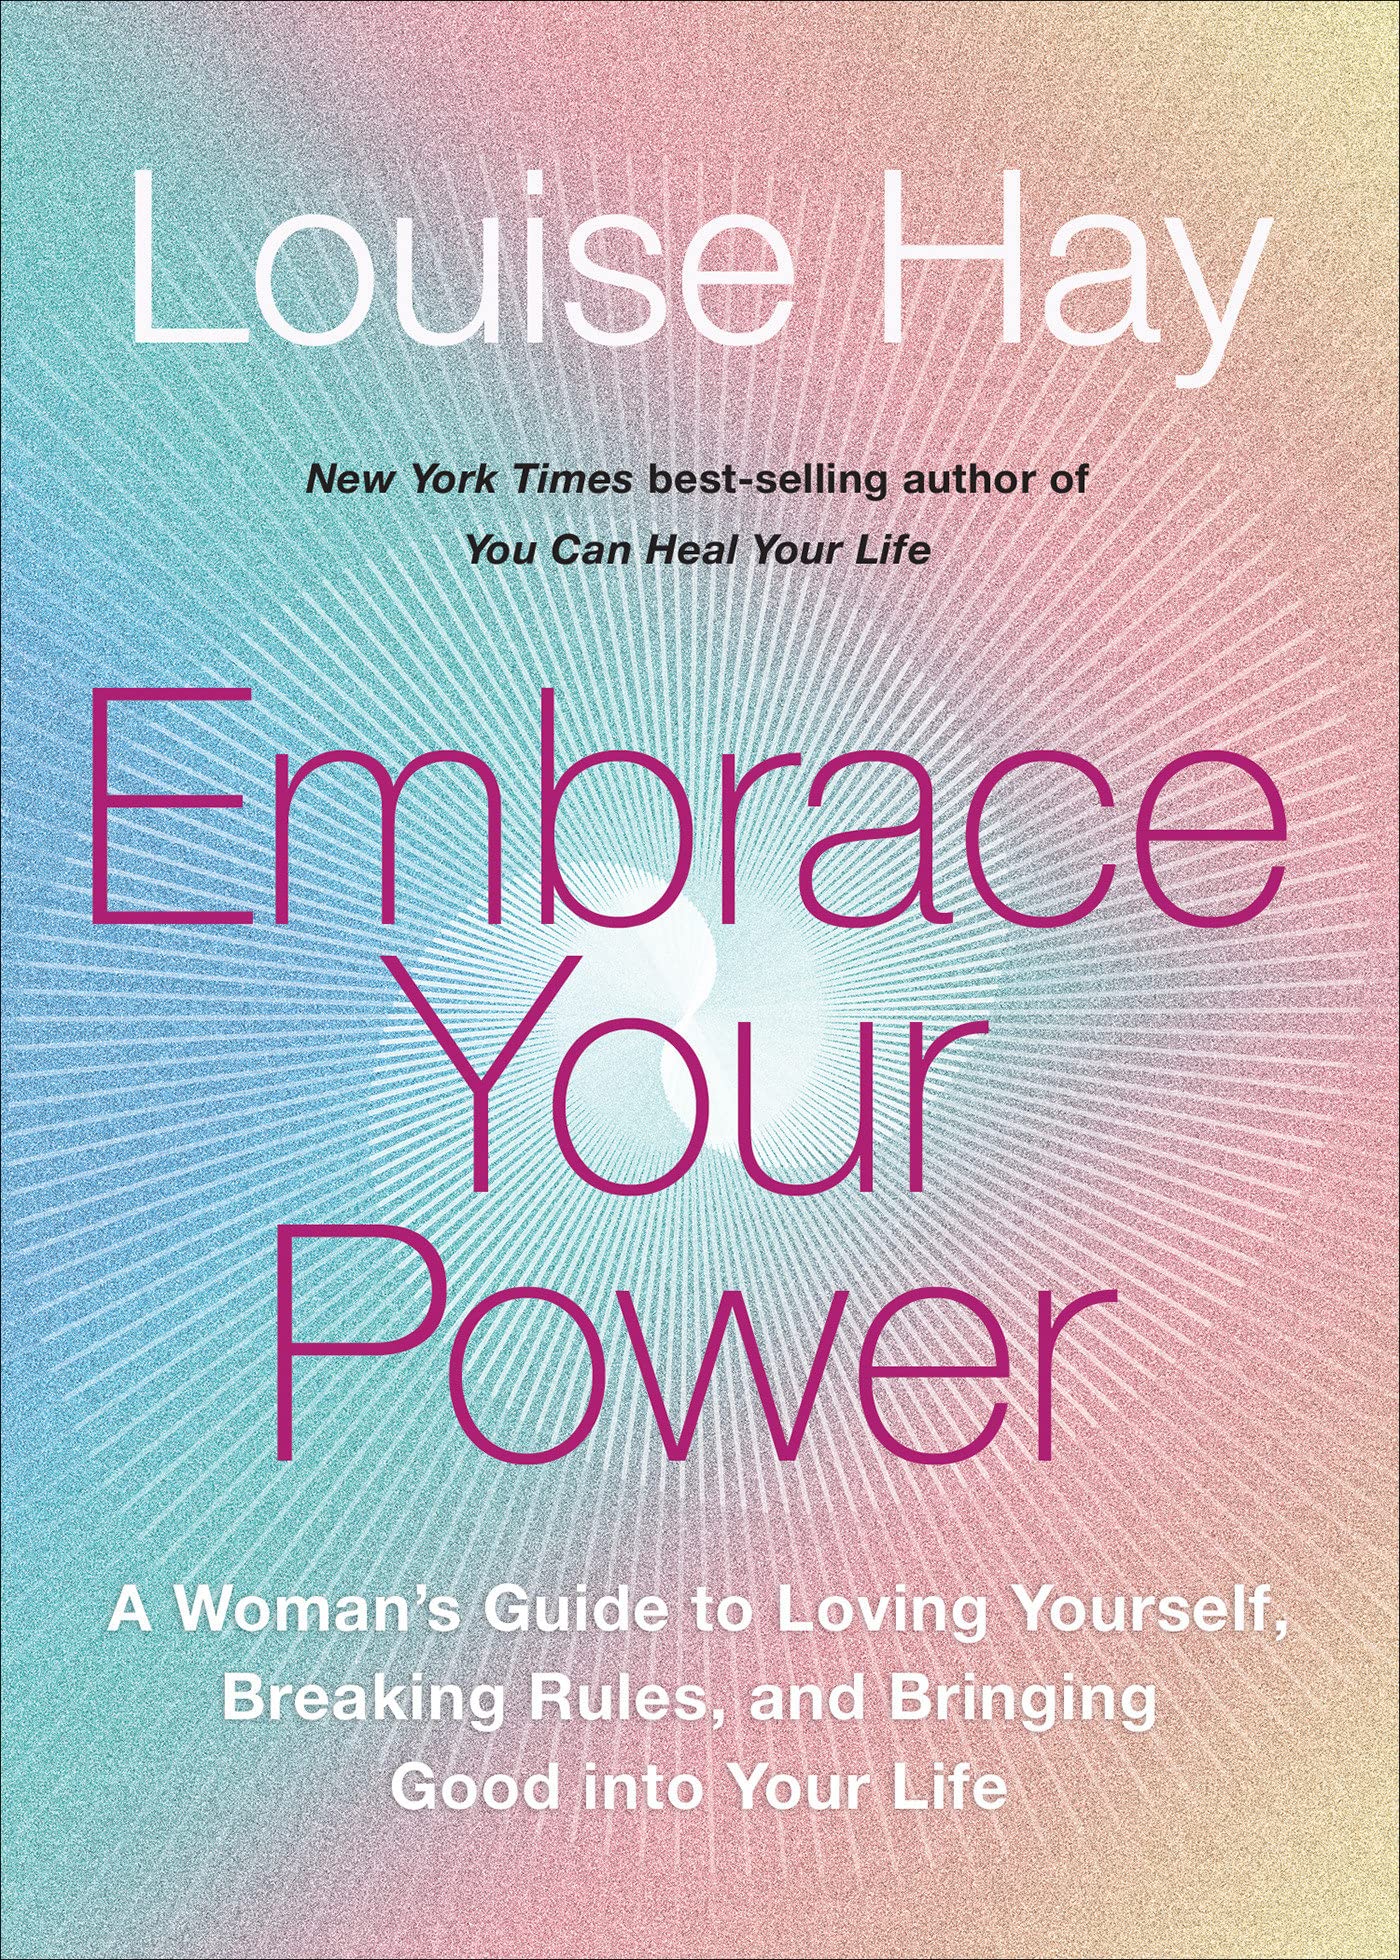 Embrace Your Power: A Woman's Guide to Loving Yourself, Breaking Rules, and Bringing Good into Your Life